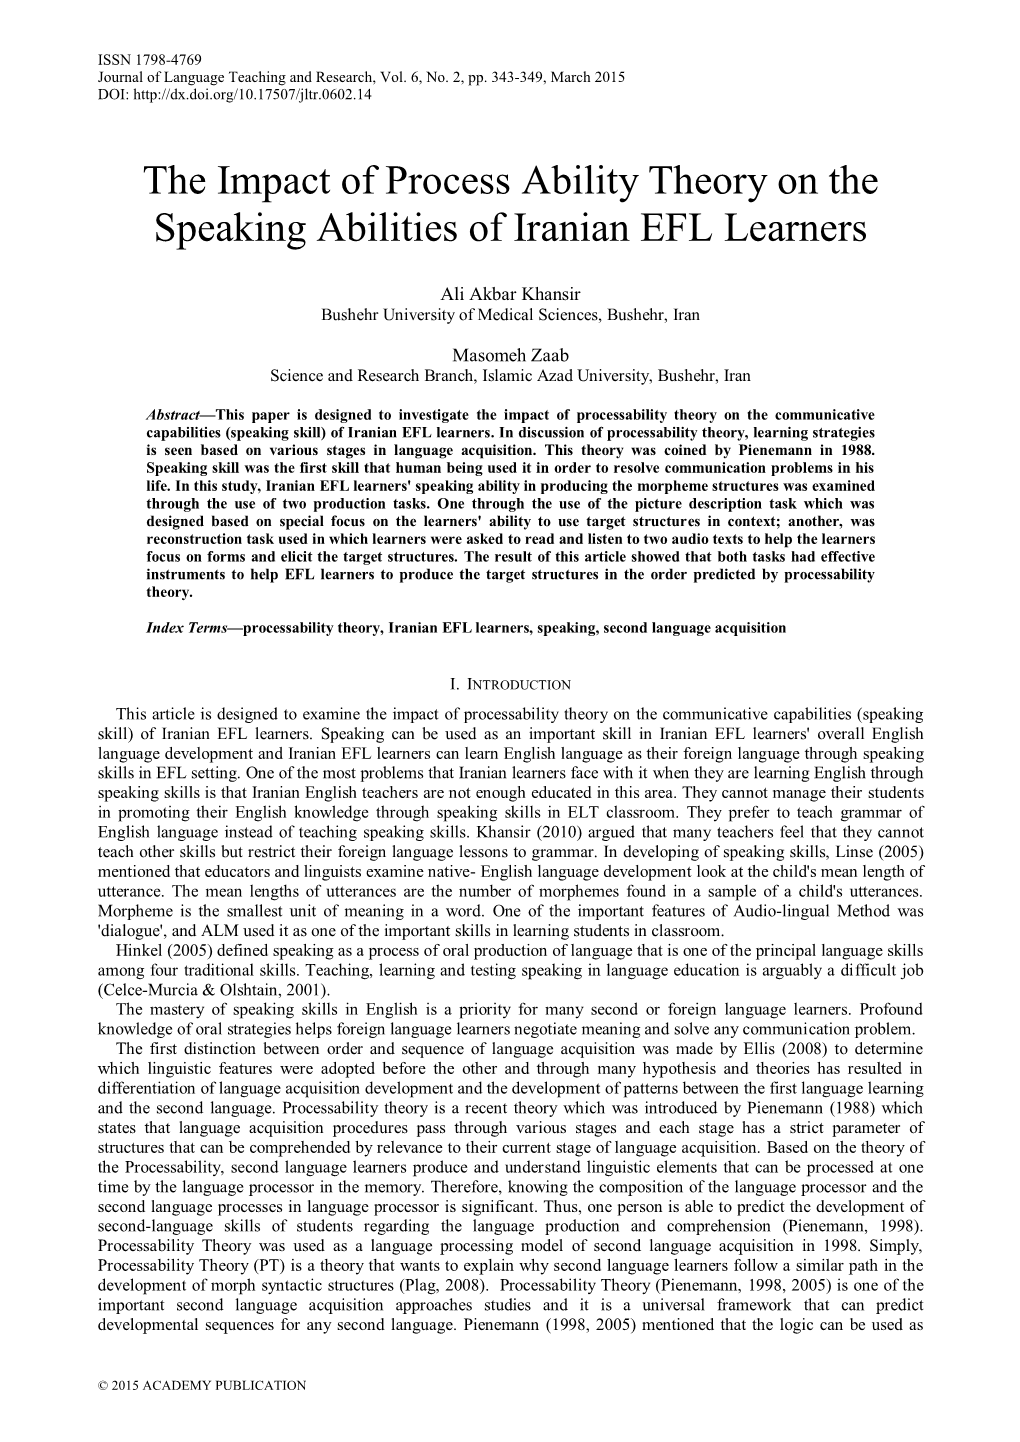 The Impact of Process Ability Theory on the Speaking Abilities of Iranian EFL Learners